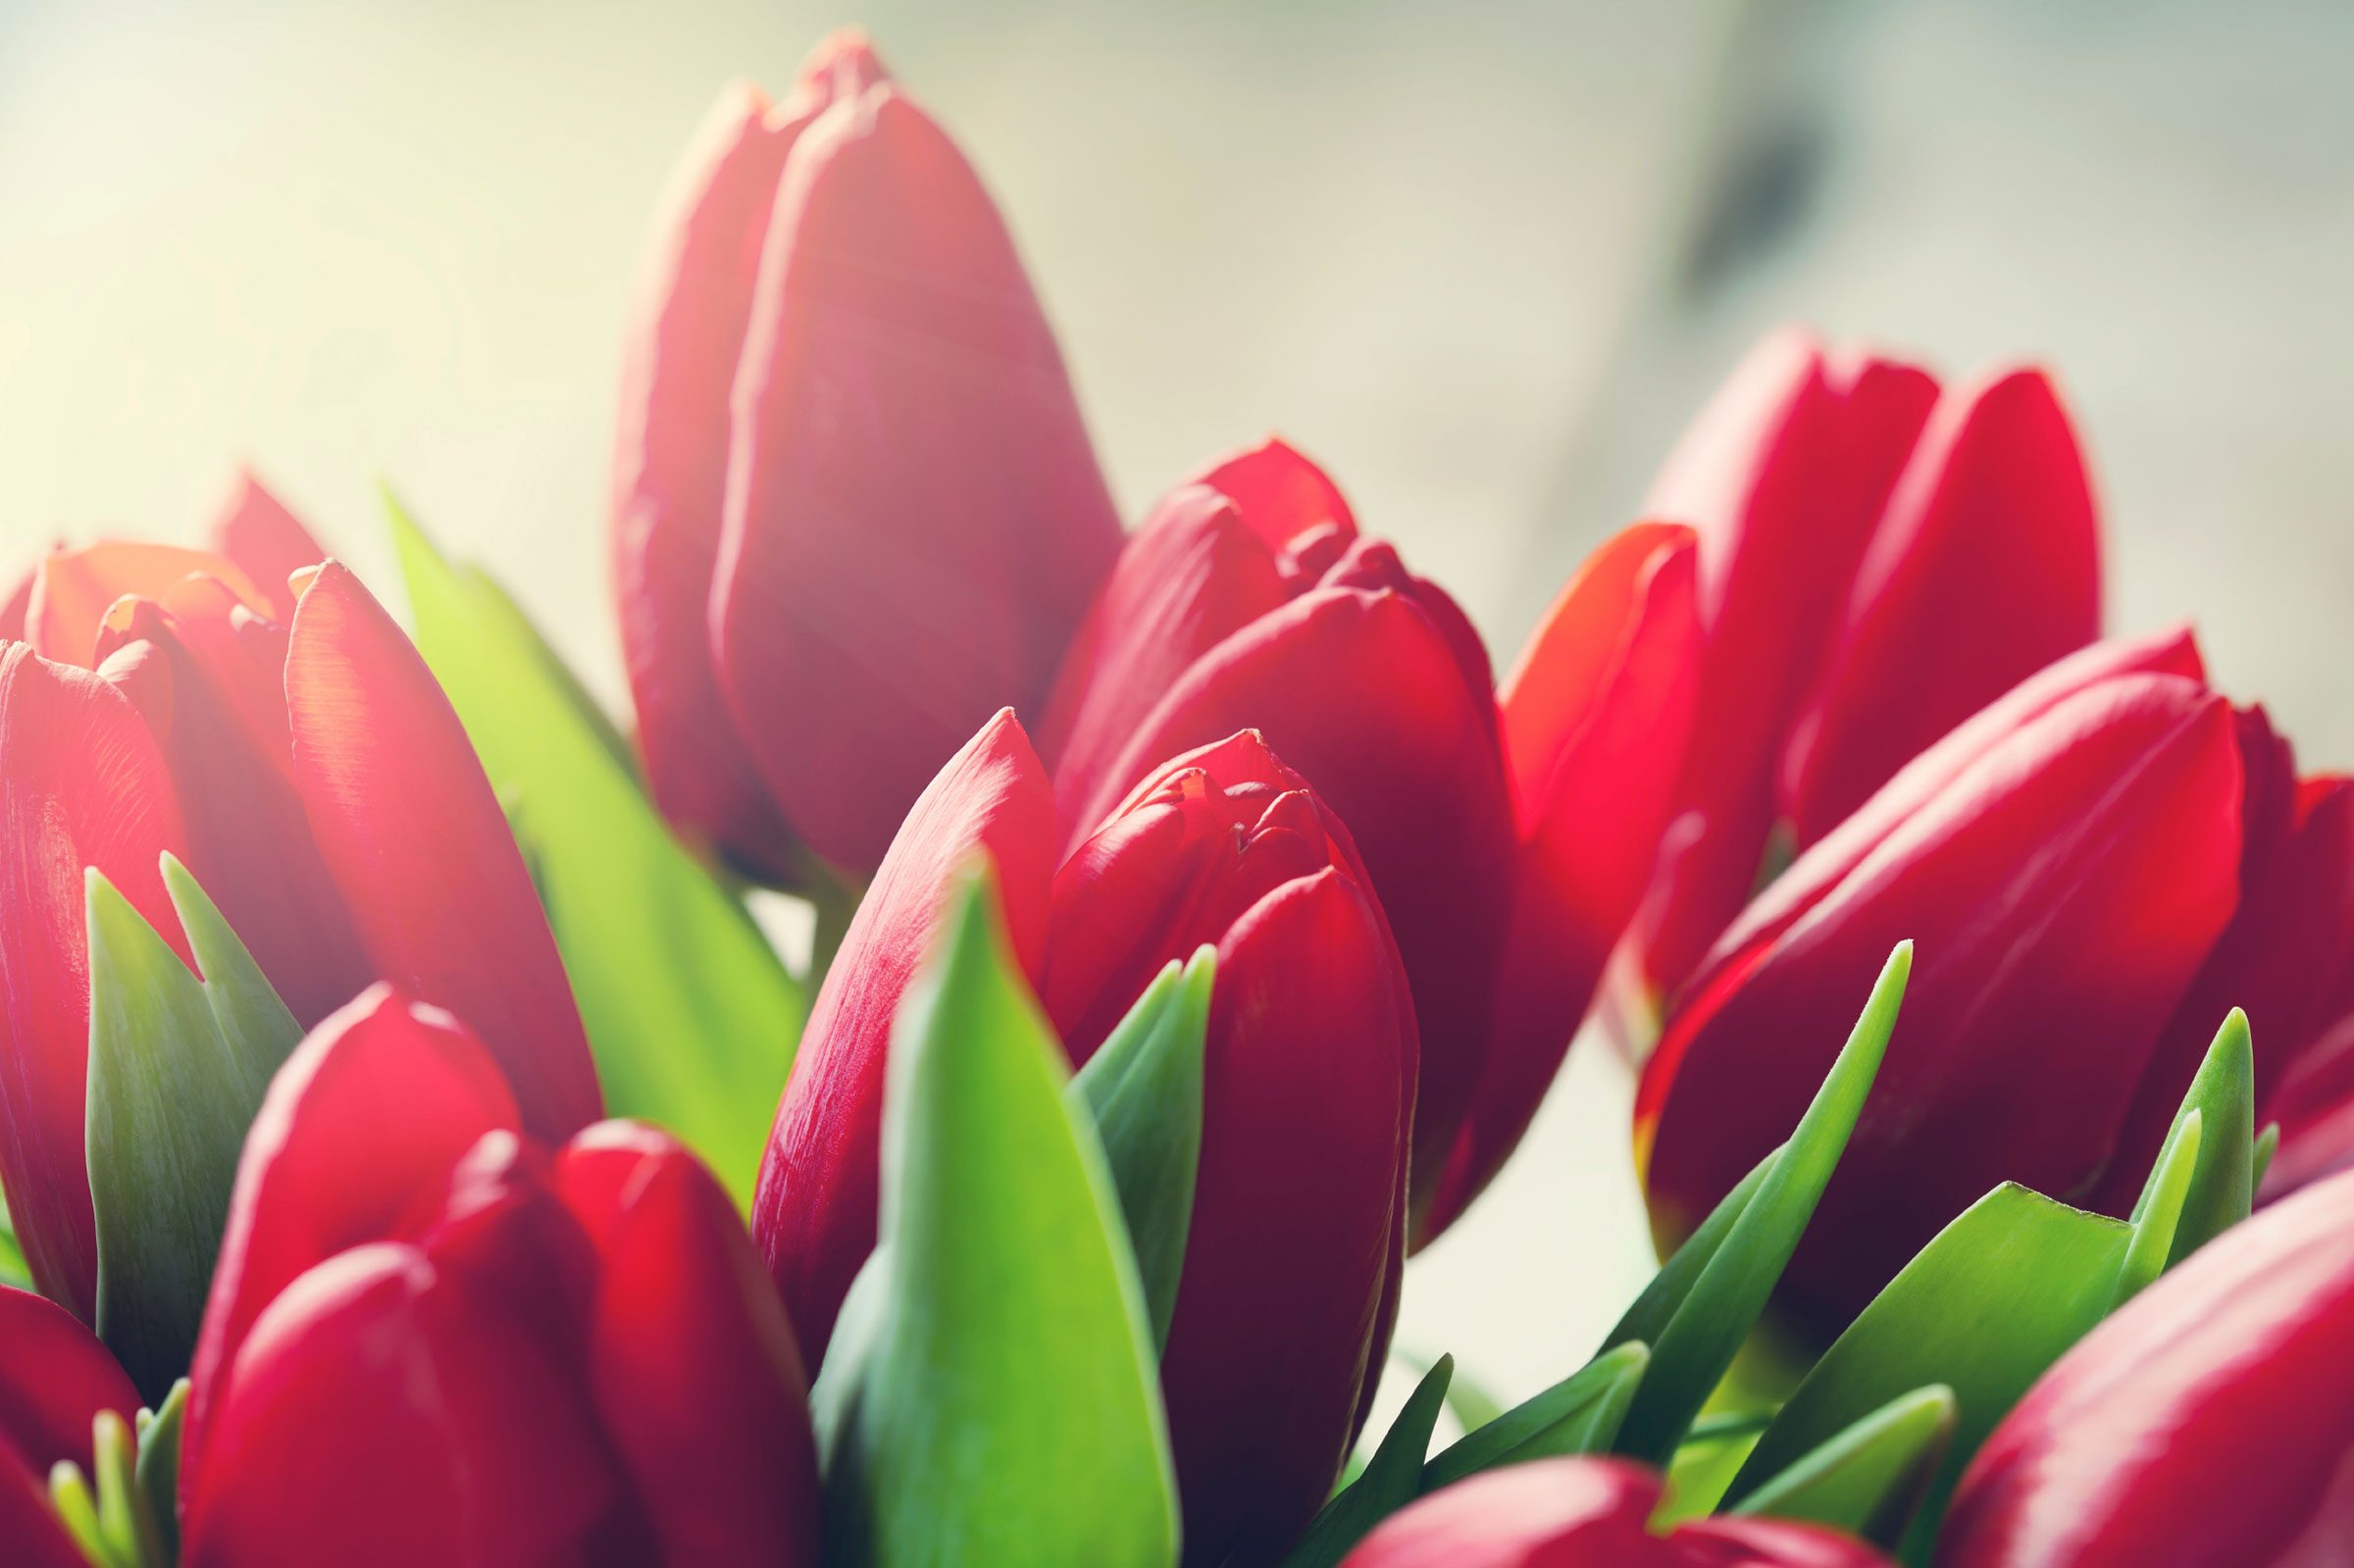 13 Things Your Florist Won't Tell You | Reader's Digest2400 x 1599